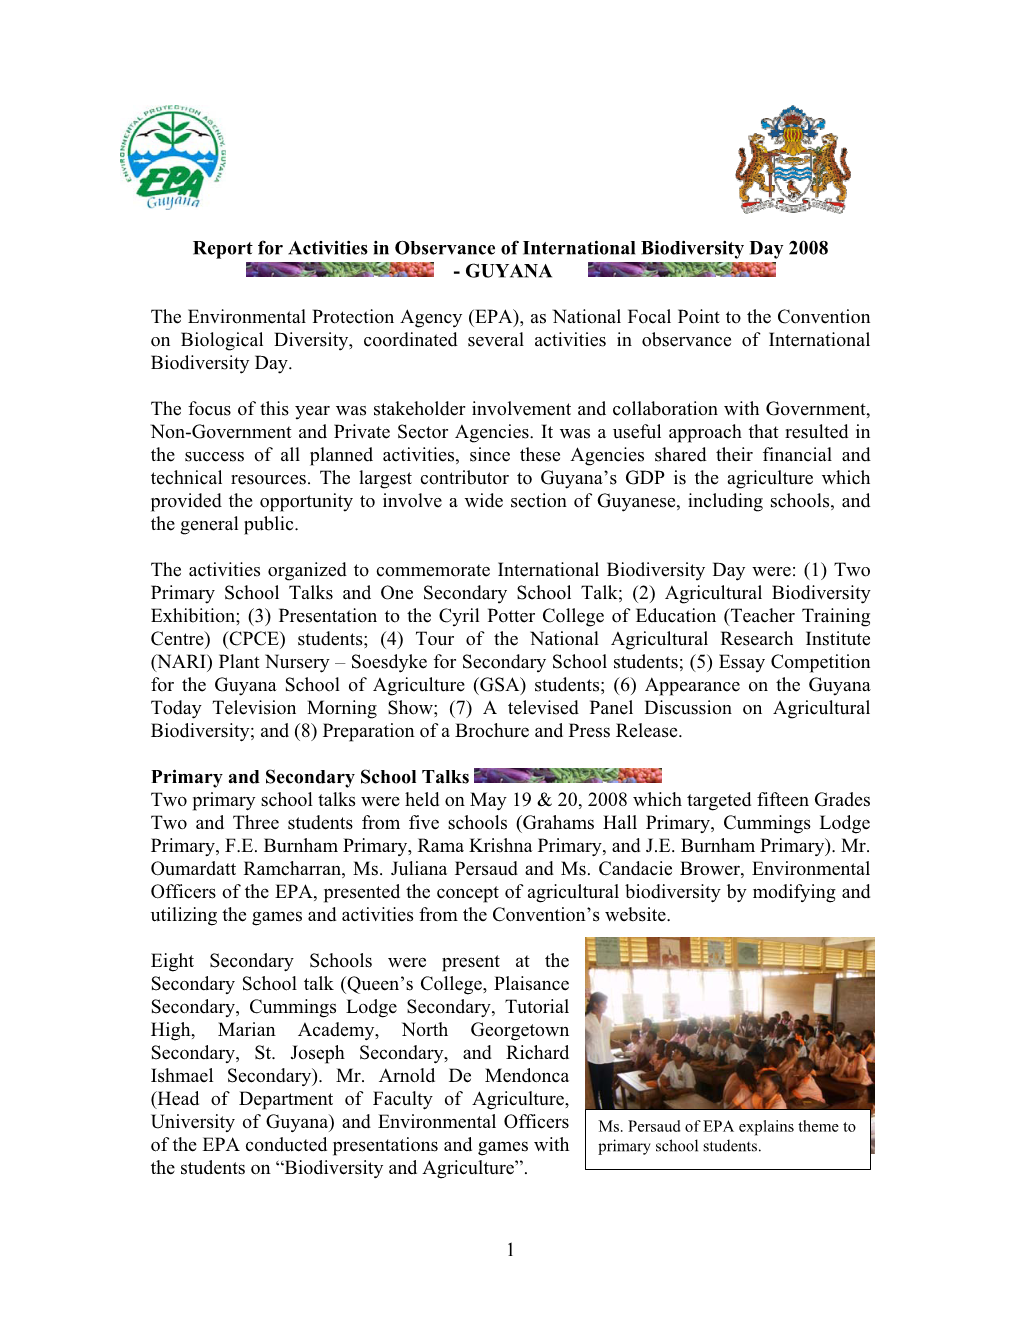 Report for Activities in Observance of International Biodiversity Day 2008 - GUYANA